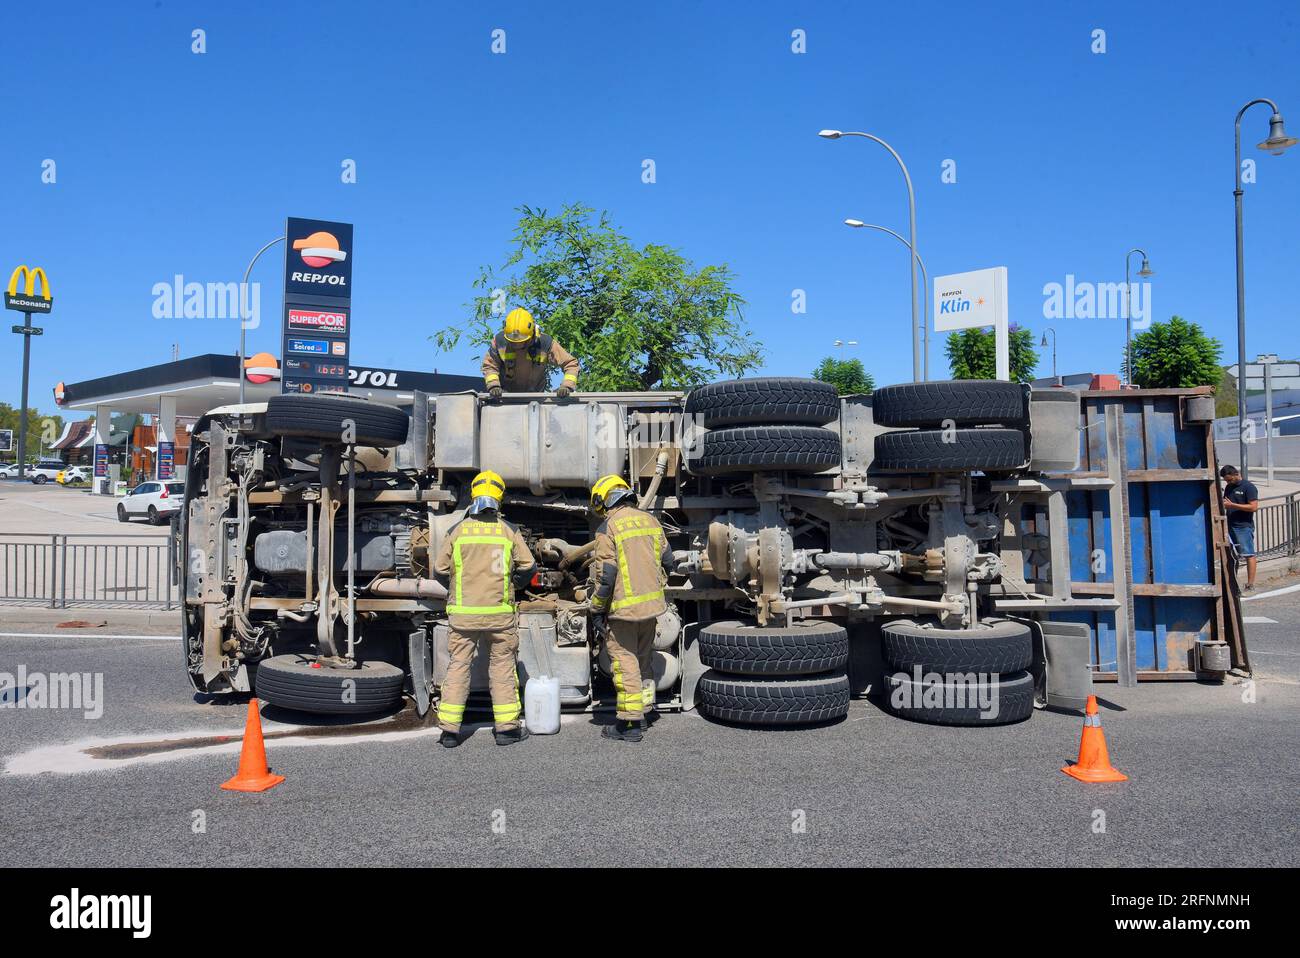 August 4, 2023, Roda de BerÃ, Tarragona, Spain: Firefighters from the government of Catalonia work on the accident of a truck in Roda de BerÃ Tarragona Spain. A truck from an excavation company has overturned loaded with stones, brushwood on the National Highway in Roda de BerÃ . Crews from the Government of Catalonia firefighters, the Local Police of Roda de BerÃ reached the scene of the accident and found no victims or injuries and the driver has emerged unharmed from the accident, the accident has caused retentions of 7 km on the national highway N-340. (Credit Image: © Ramon Costa/SOPA I Stock Photo